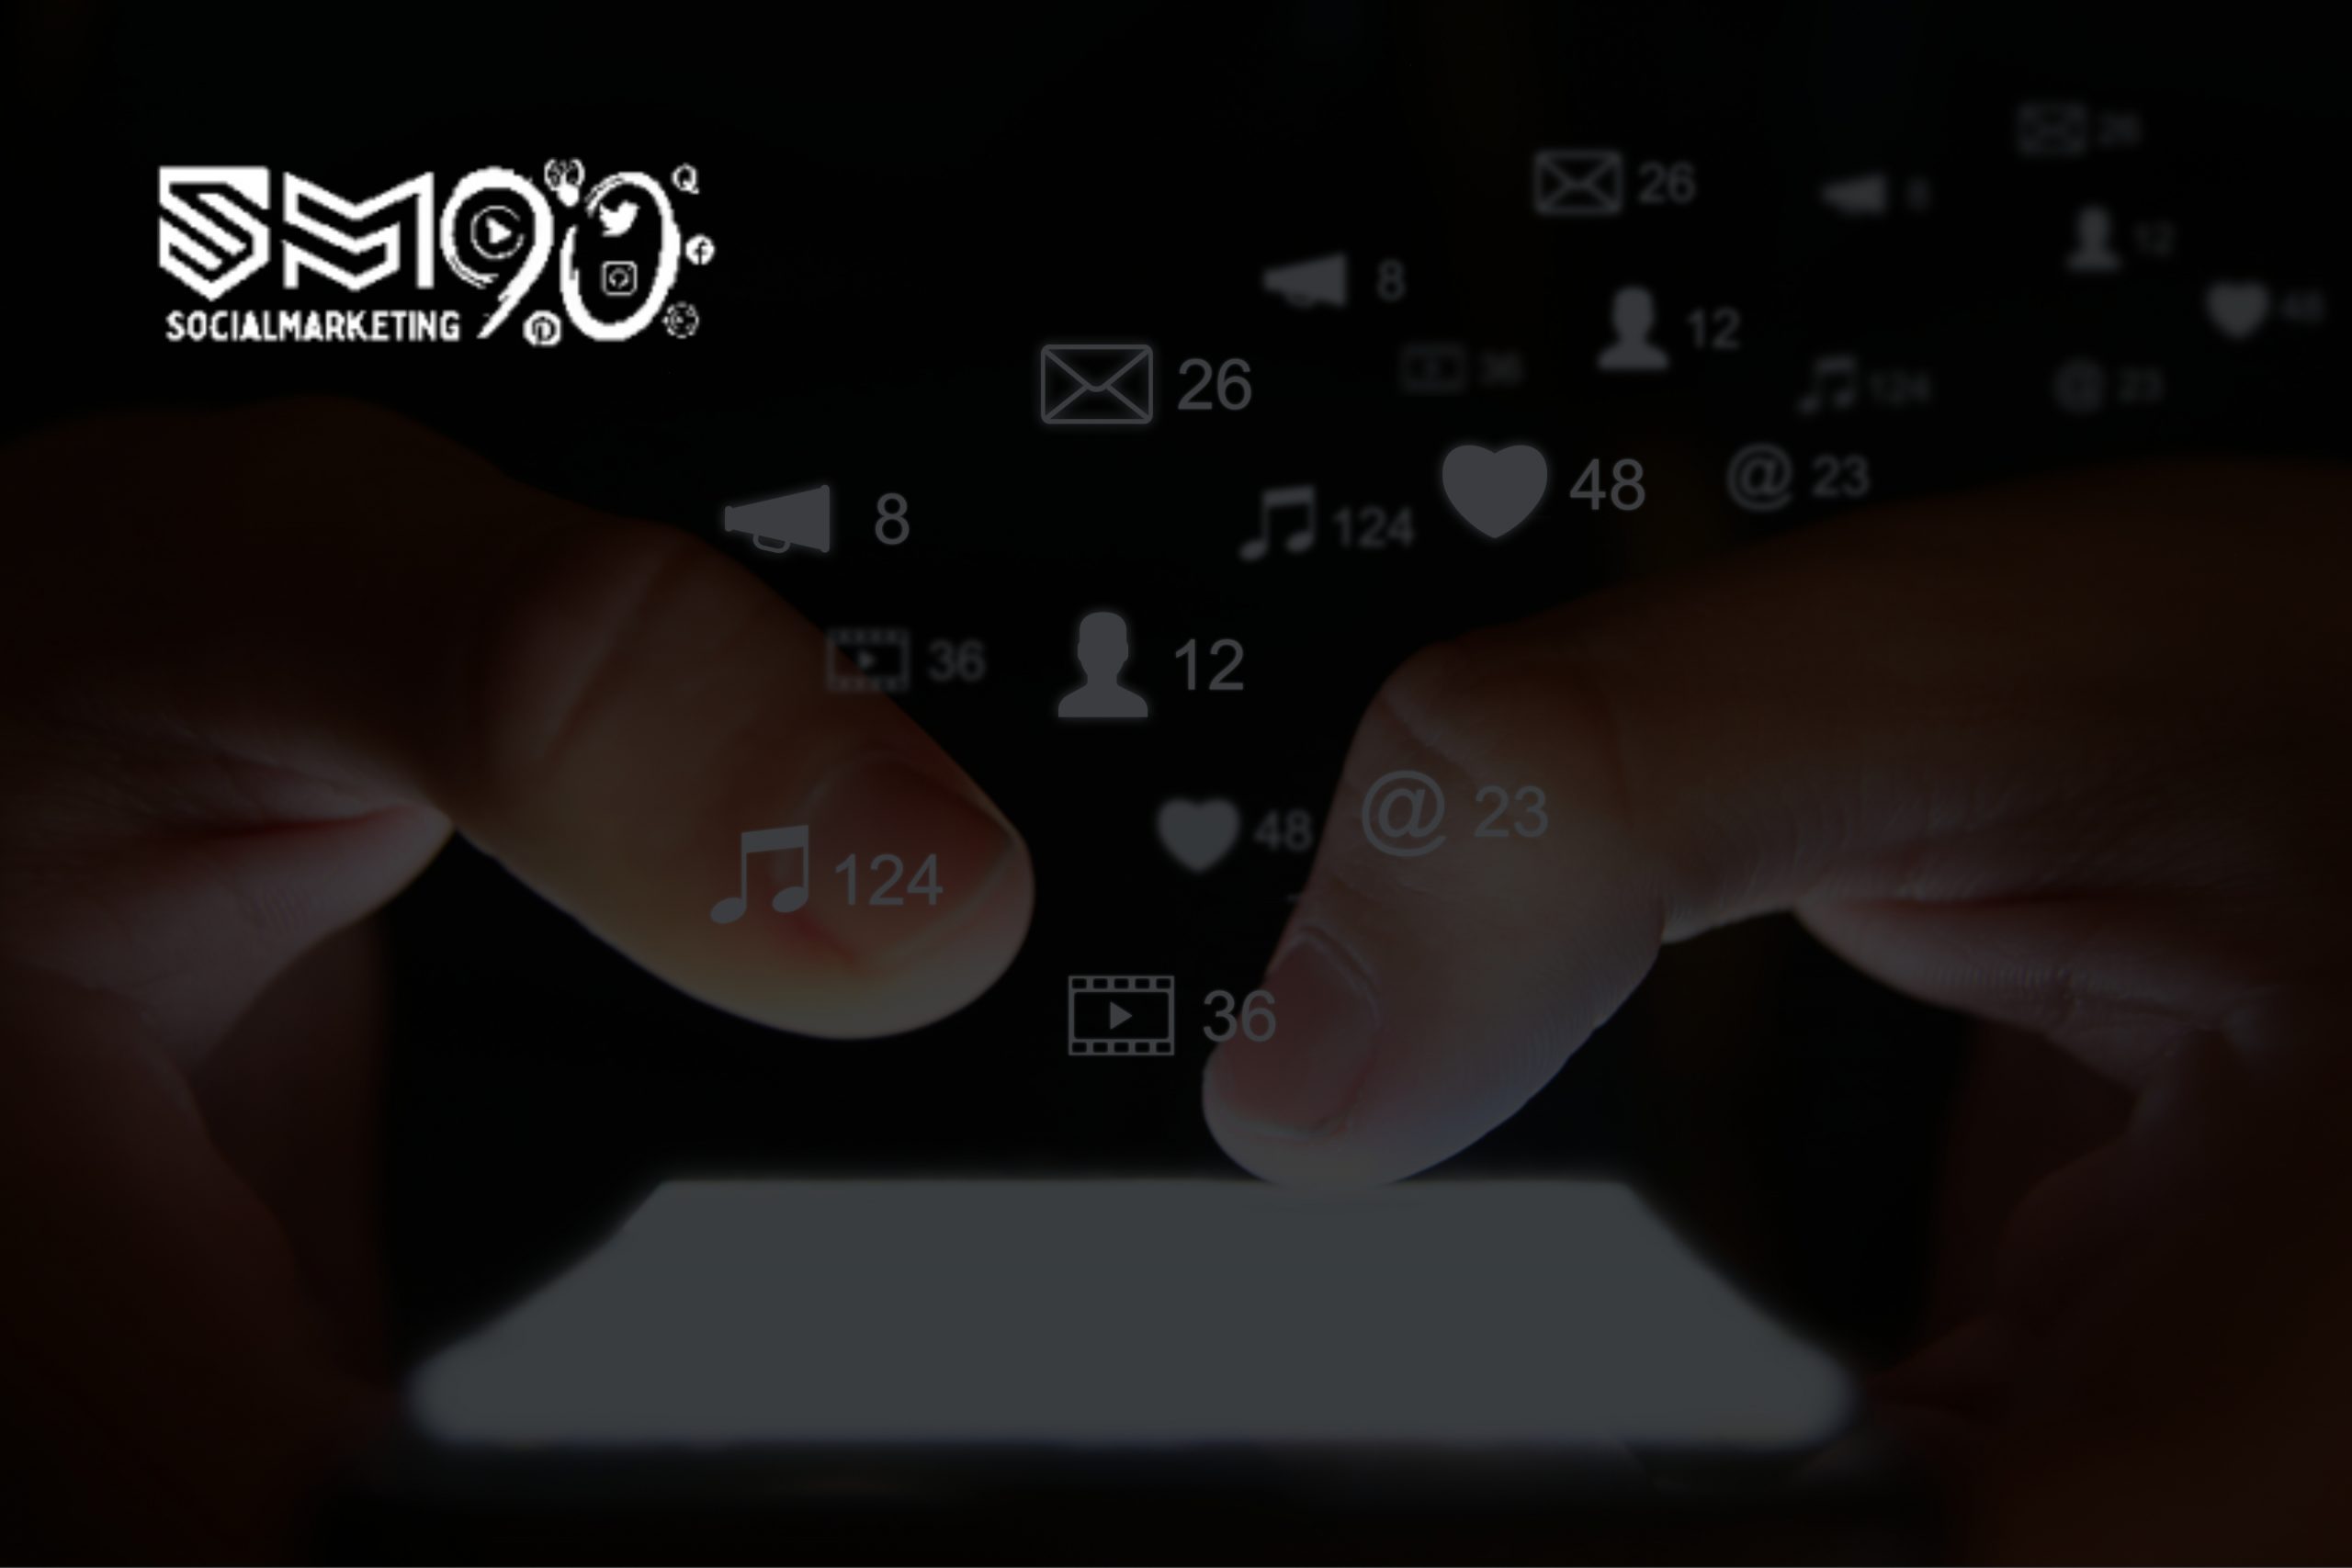 How SocialMarketing90 Can Help You Reach Your Target Audience